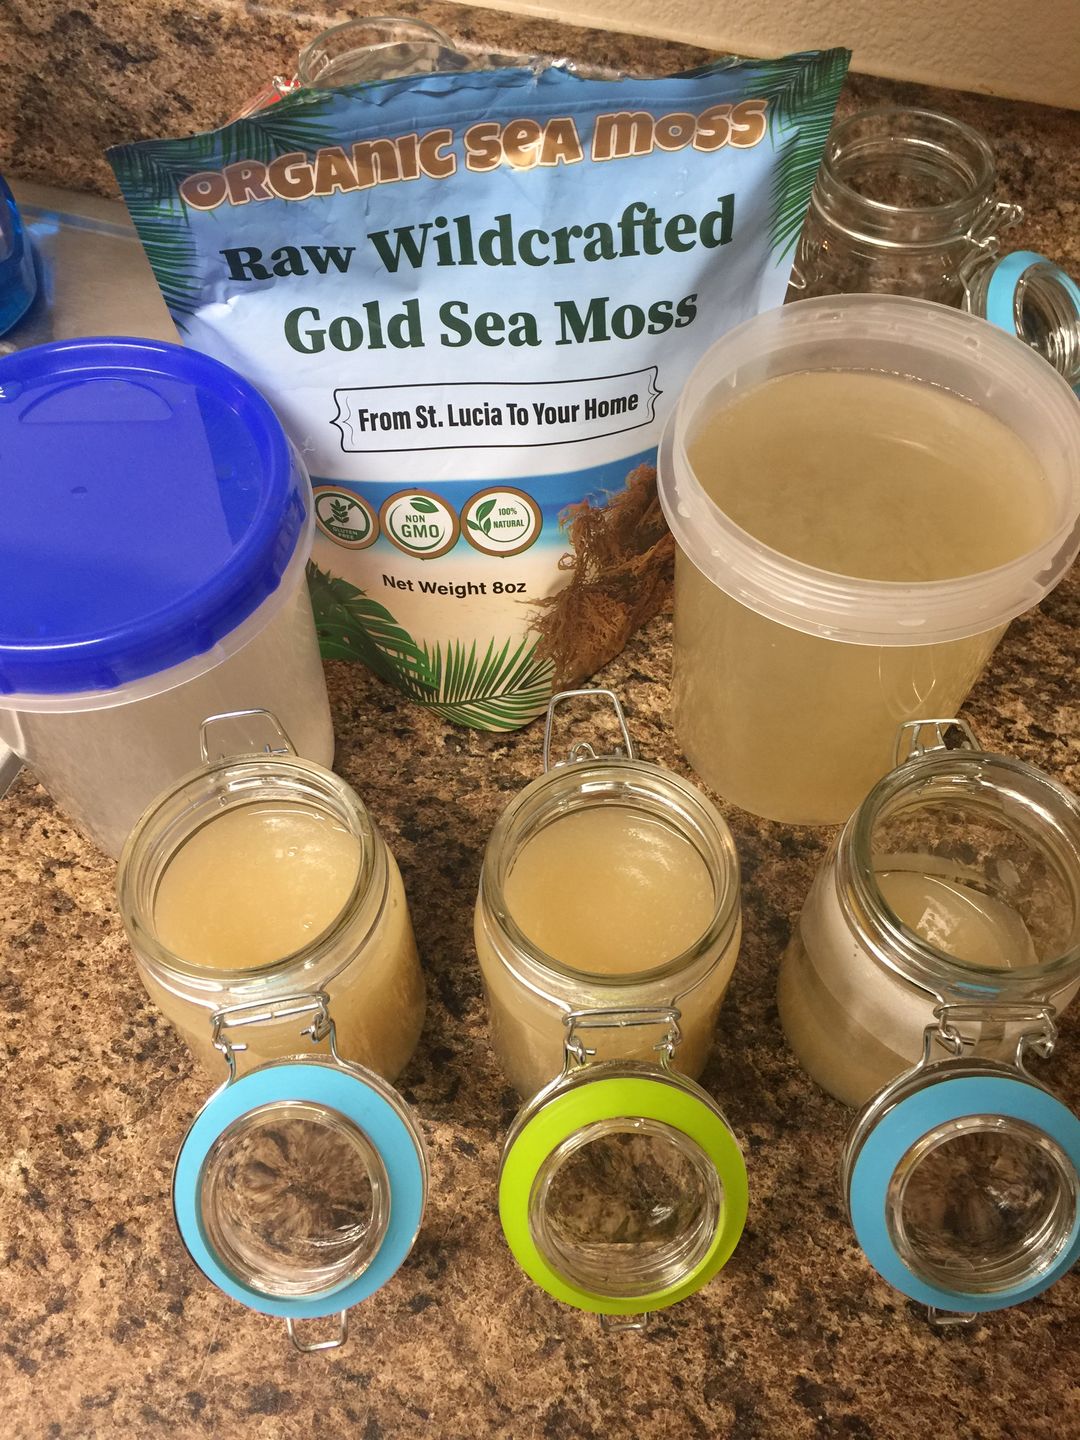 Organics Nature Wild Crafted Gold Sea Moss photo courtesy of That Green Lyfe